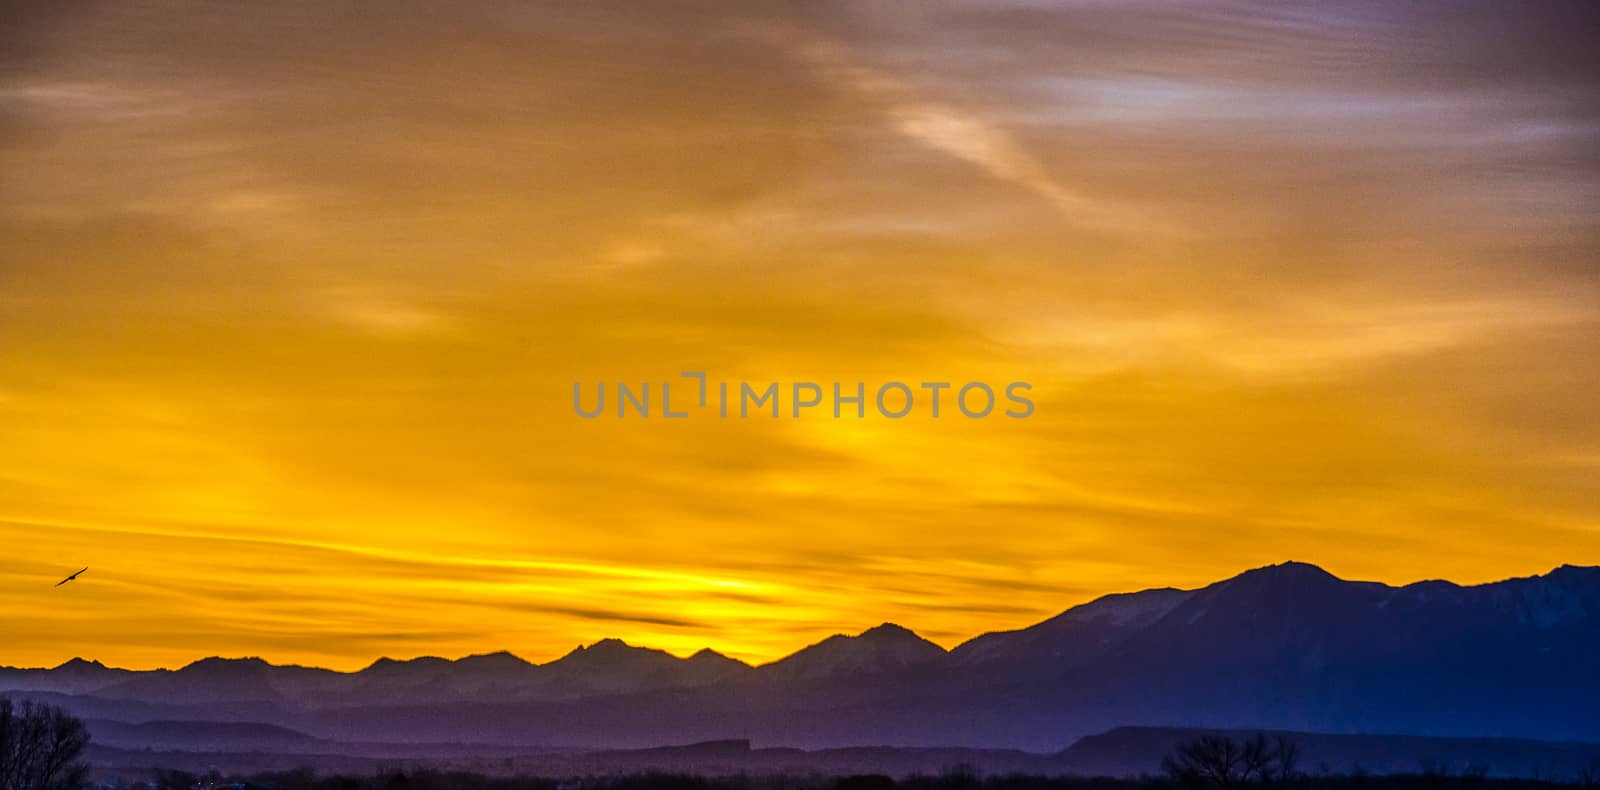 sunrise over colorado rocky mountains by digidreamgrafix